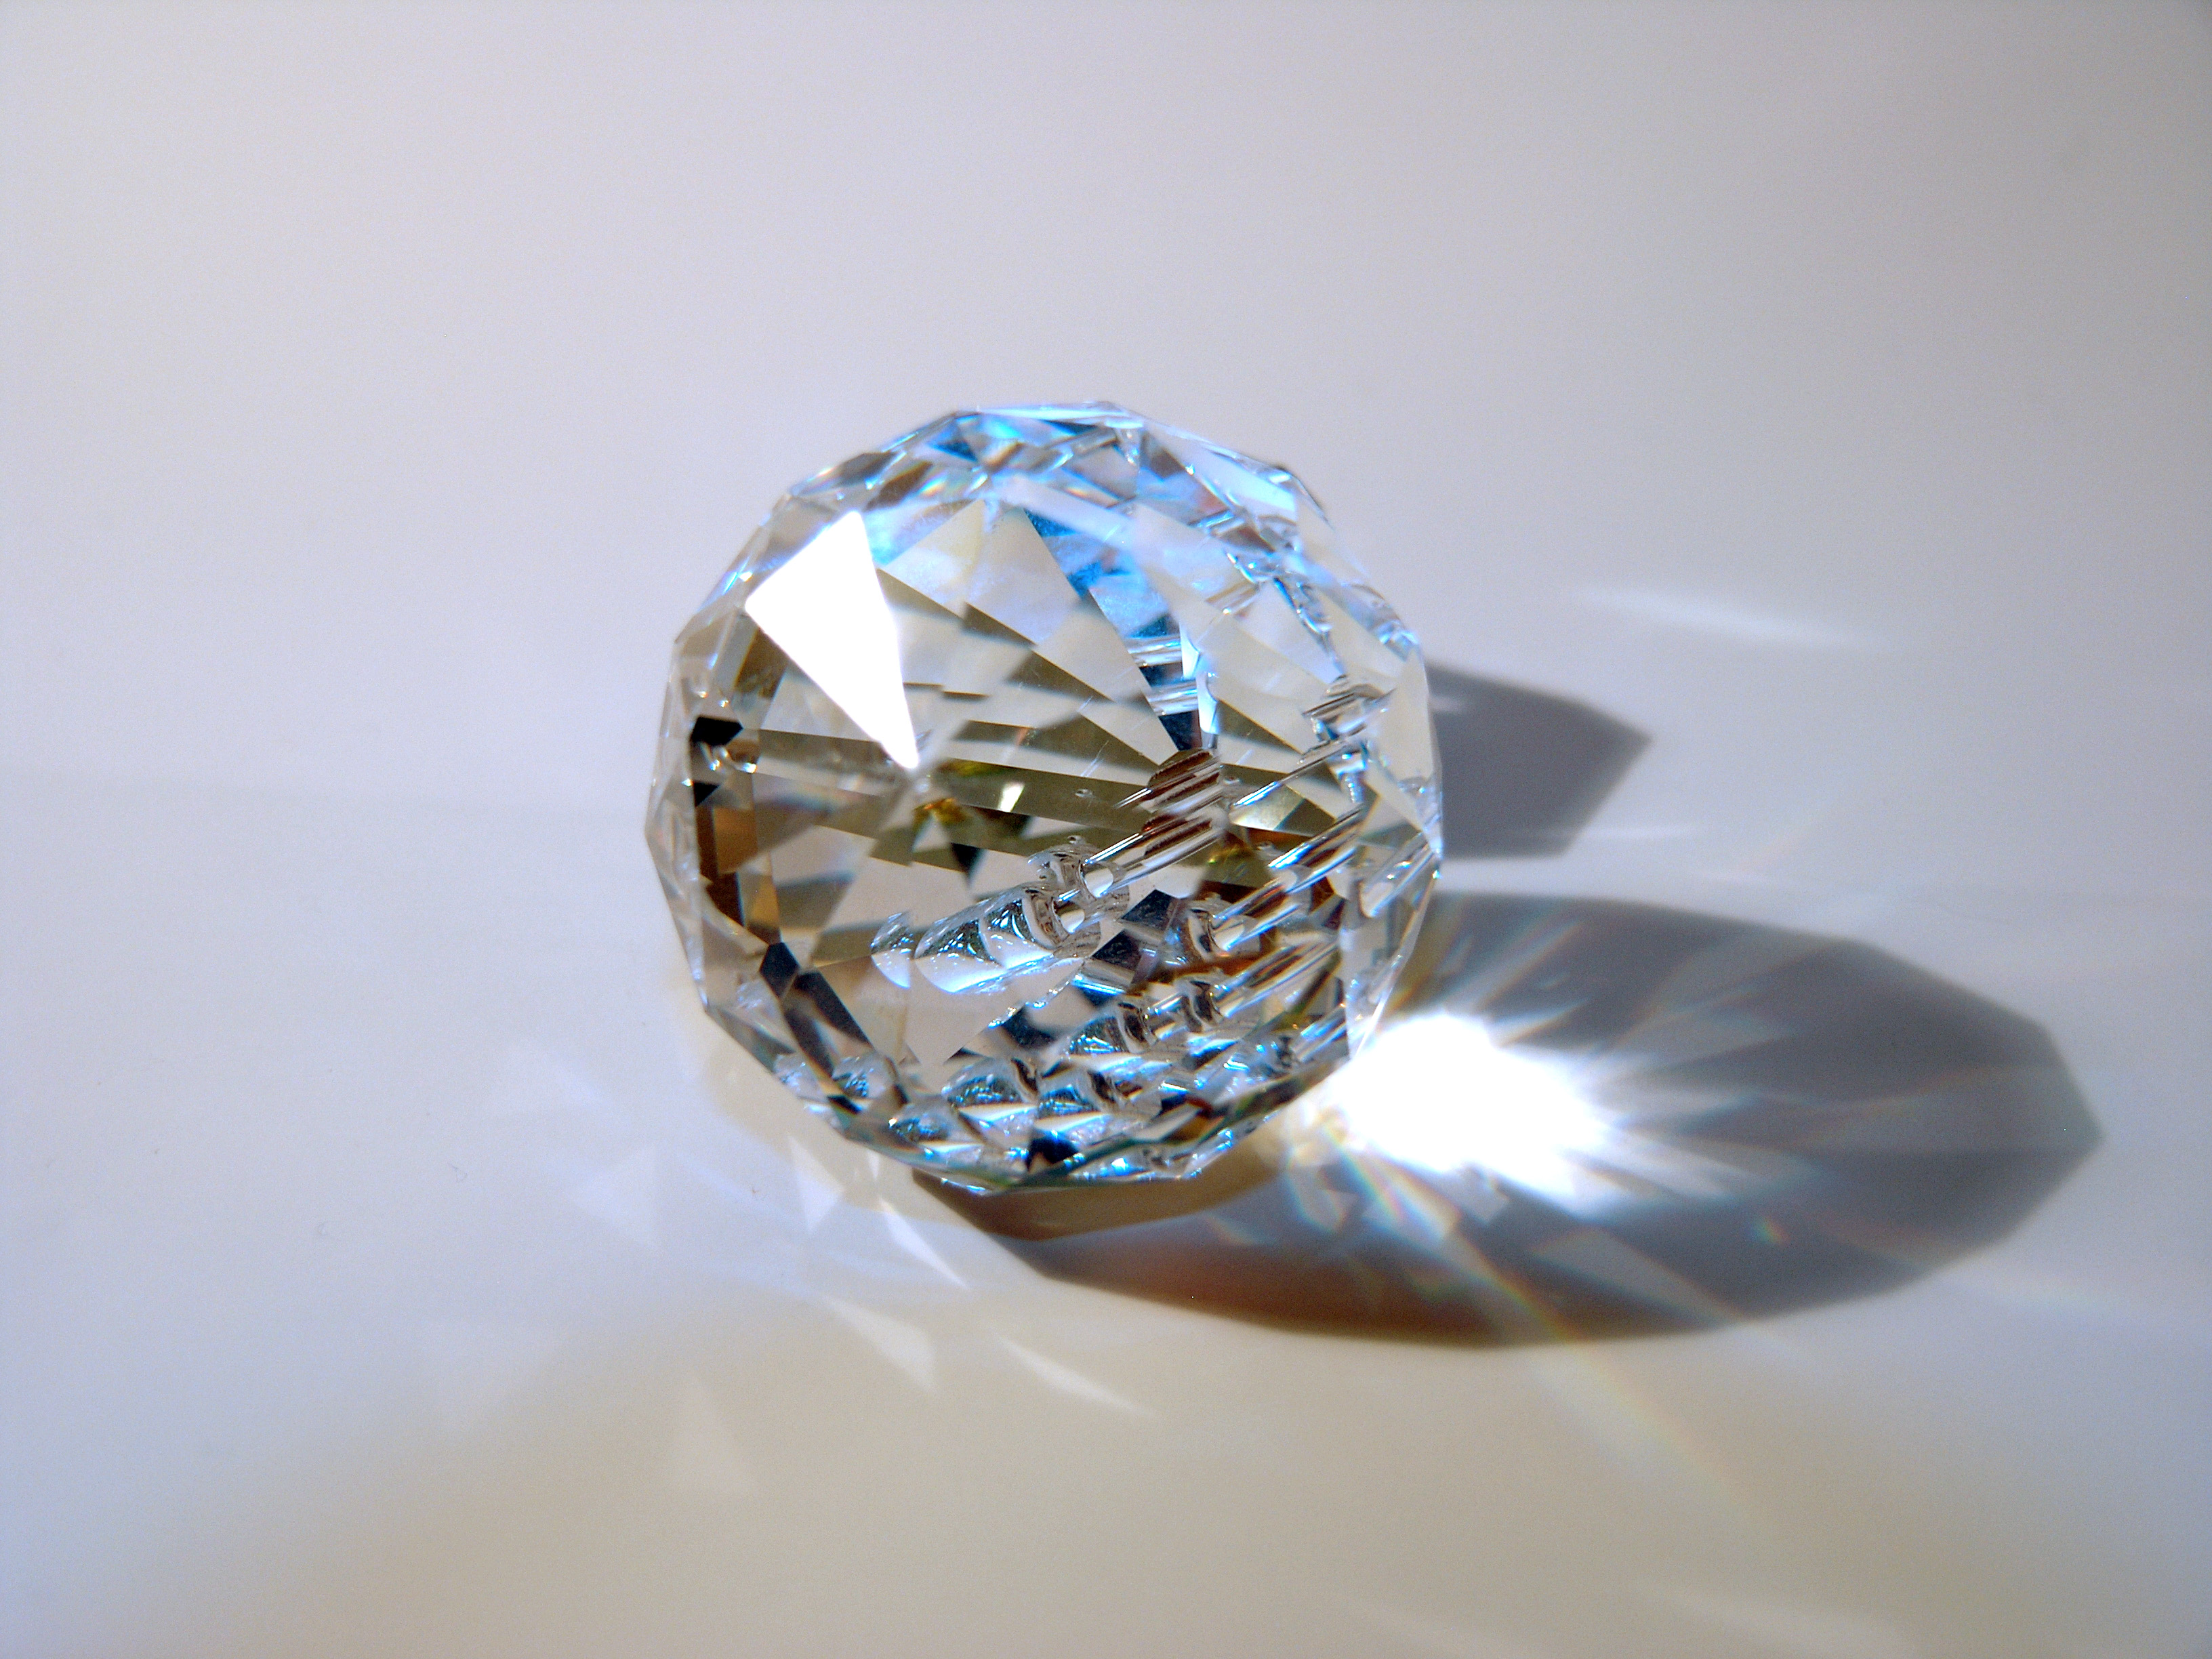 How to Order your Cremation Diamond from Ashes or Hair